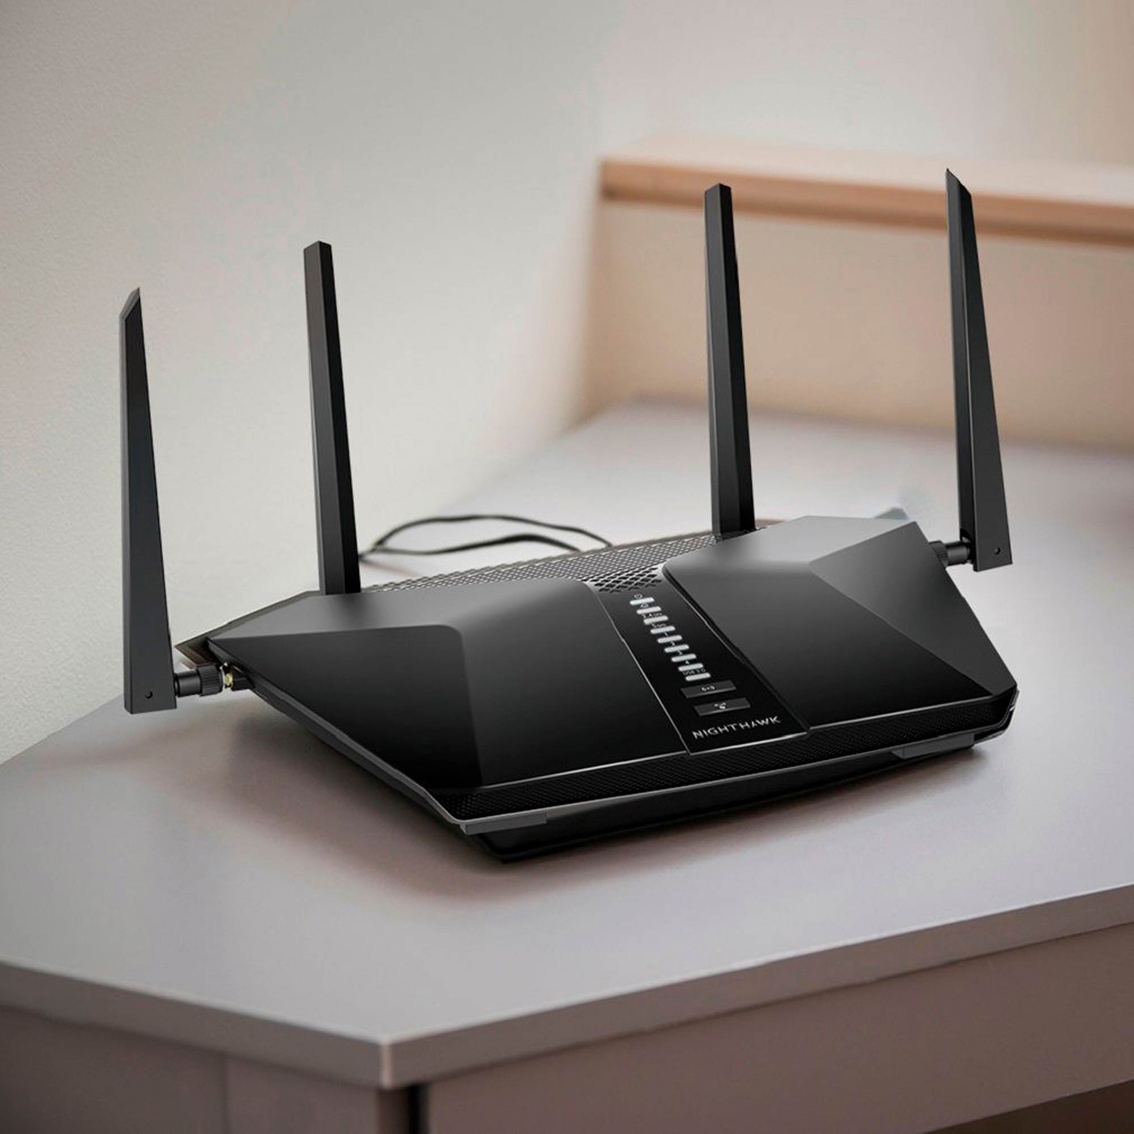 Netgear Nighthawk AX5400 Dual Band Wireless and Ethernet Router - Image 4 of 5